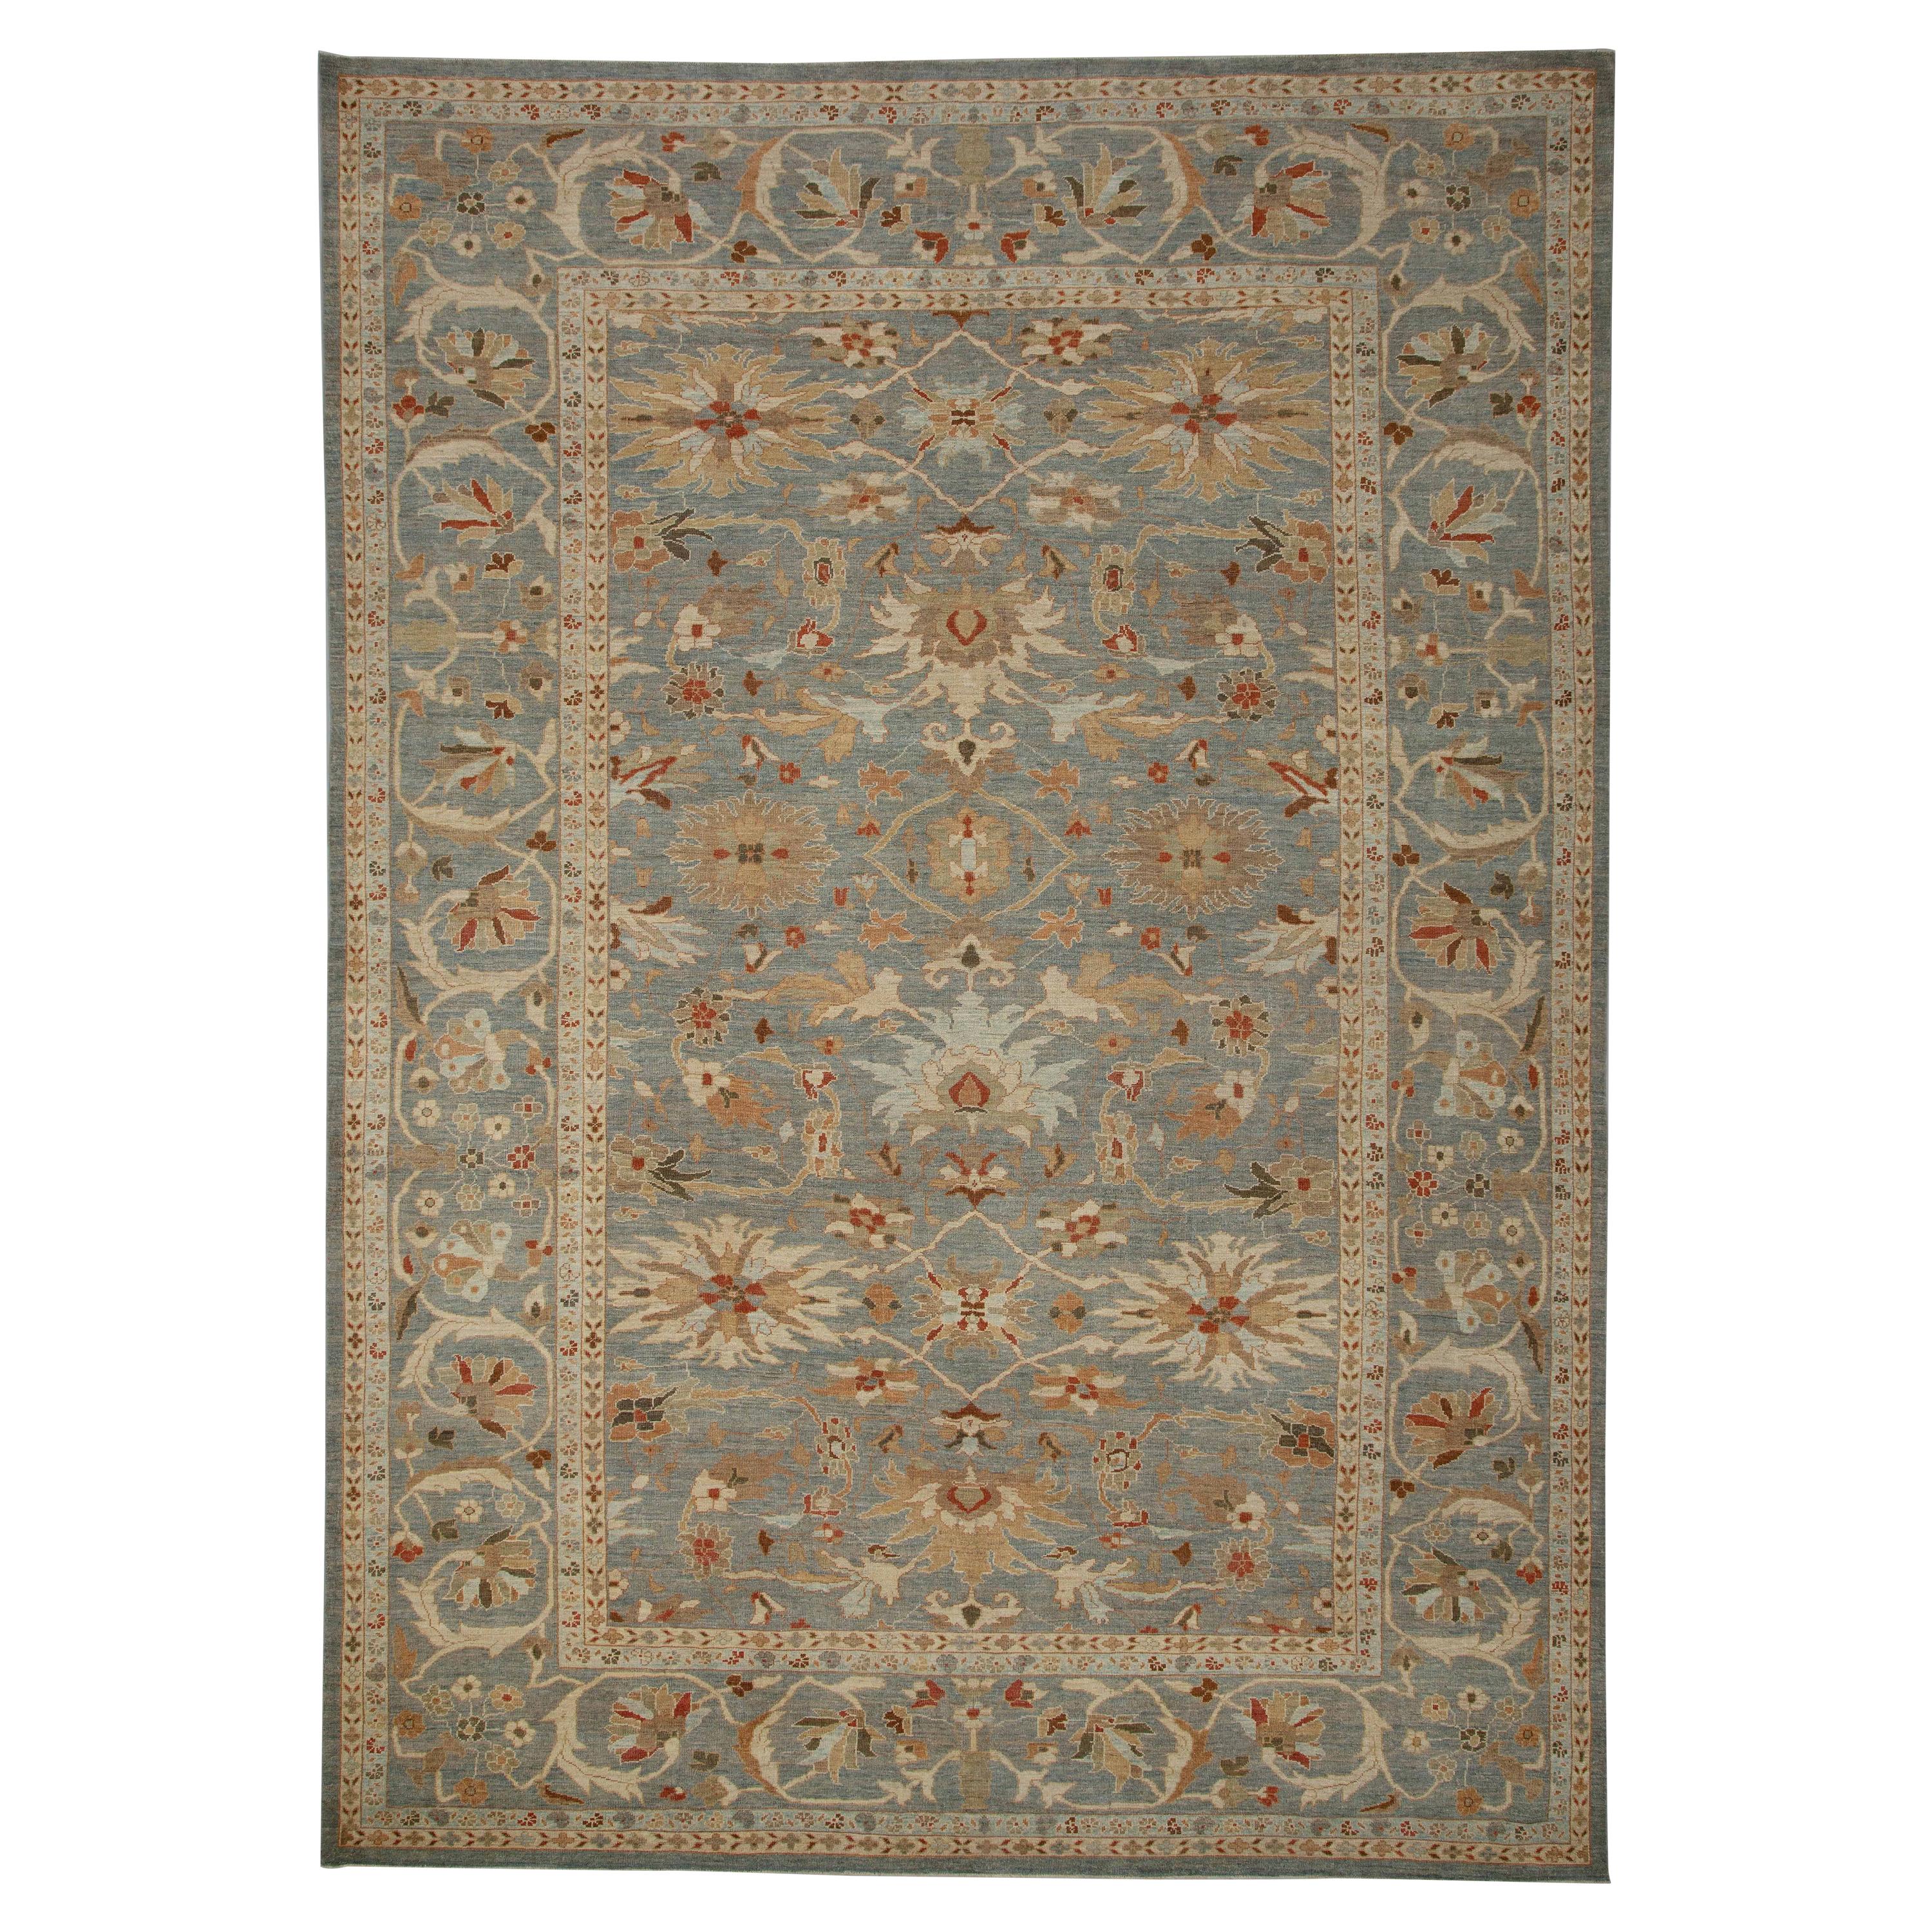 Contemporary Turkish Sultanabad Rug with Blue Gray Field of Colored Flower Detai For Sale